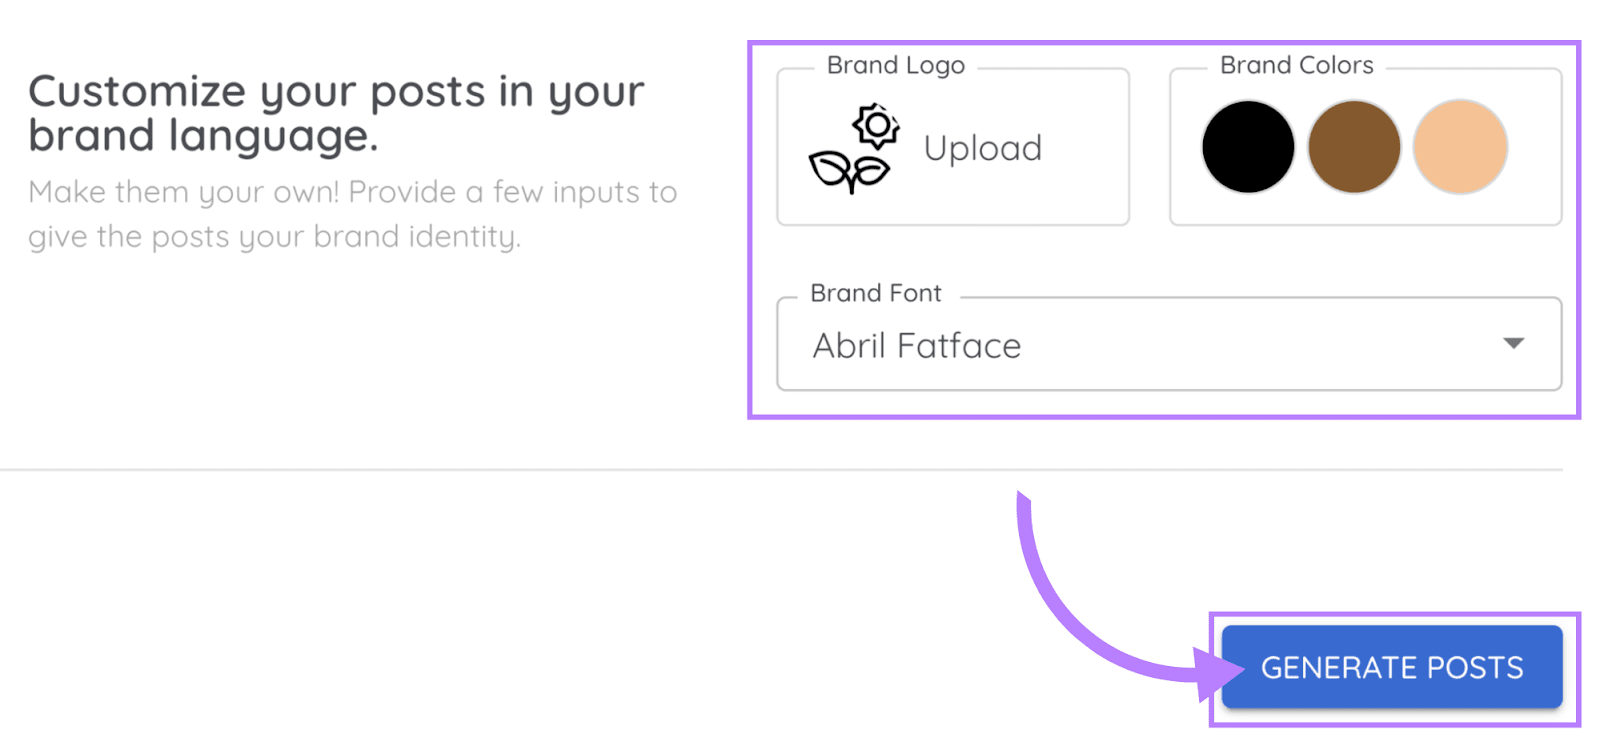 "Customize your posts in your brand language." screen in AI Social Content Generator